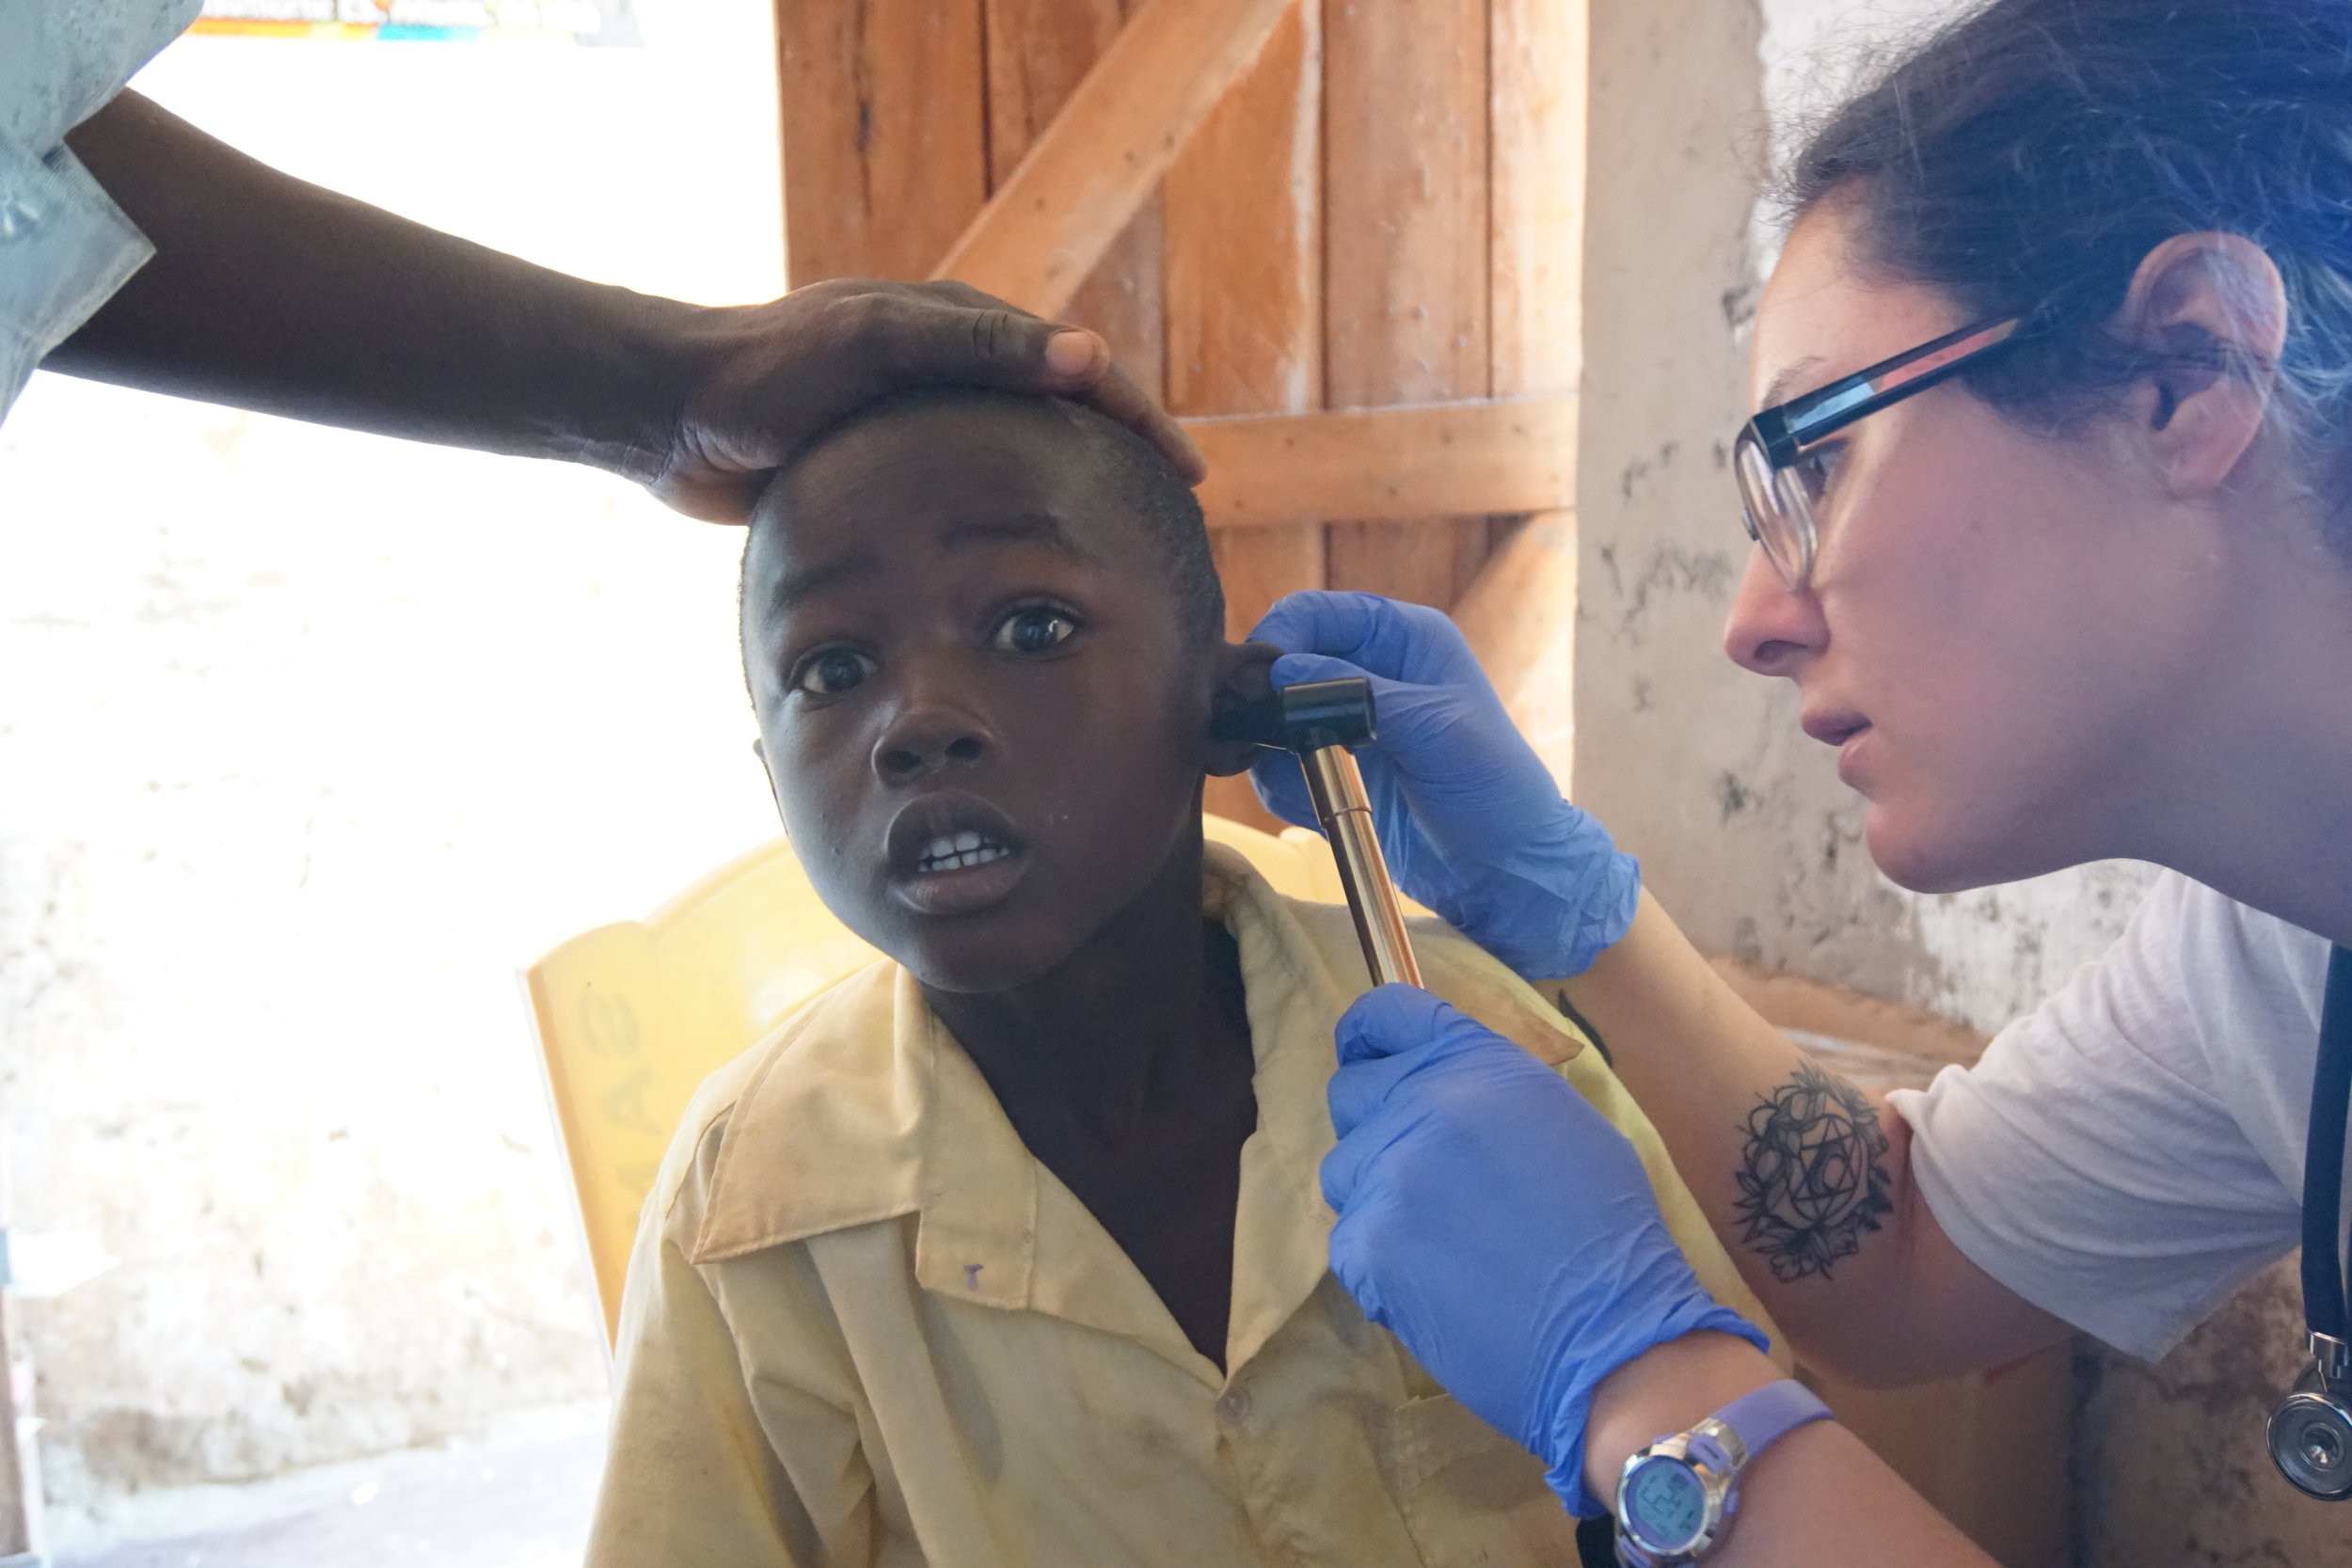  Brooke checks the ears of one of HIP's students. The otoscope was cold and the student wasn't sure what to make of it being in his ear. 